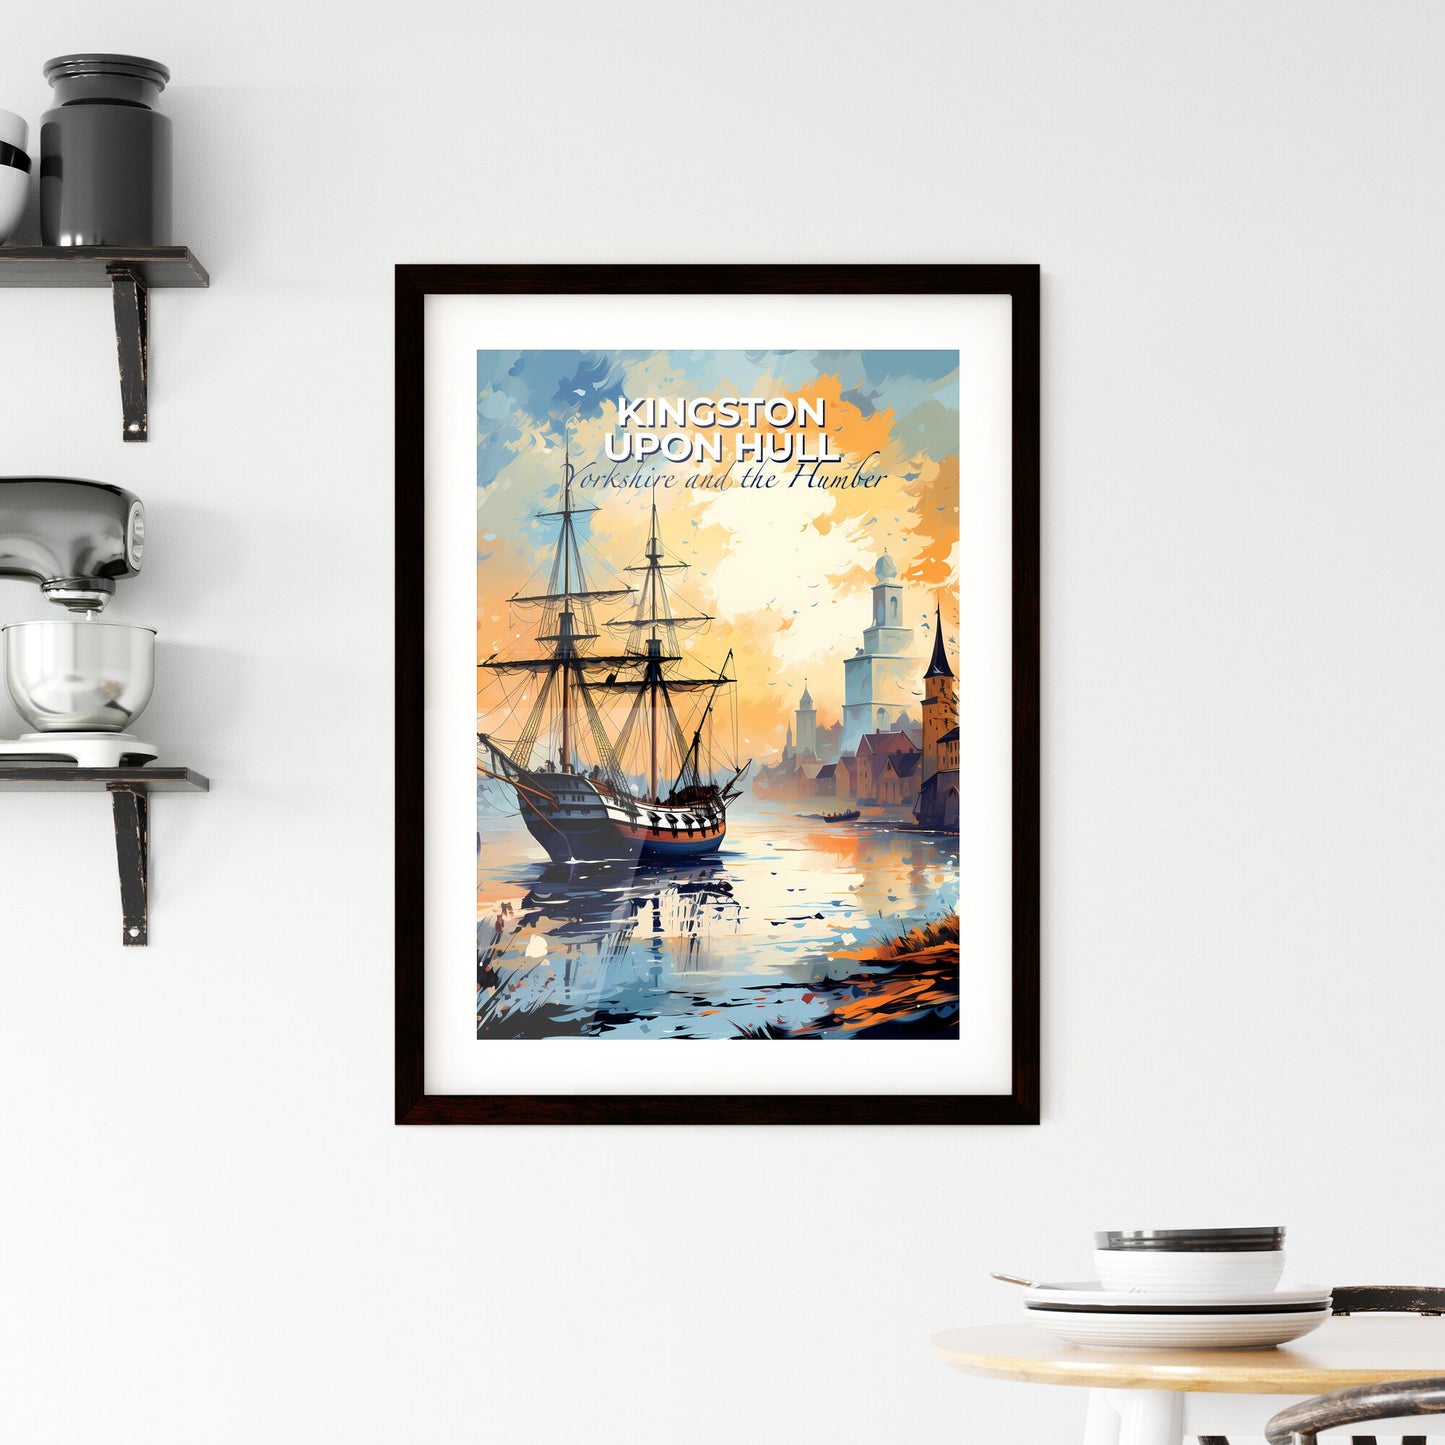 Kingston Upon Hull, Yorkshire and the Humber, A Poster of a painting of a ship in a river Default Title